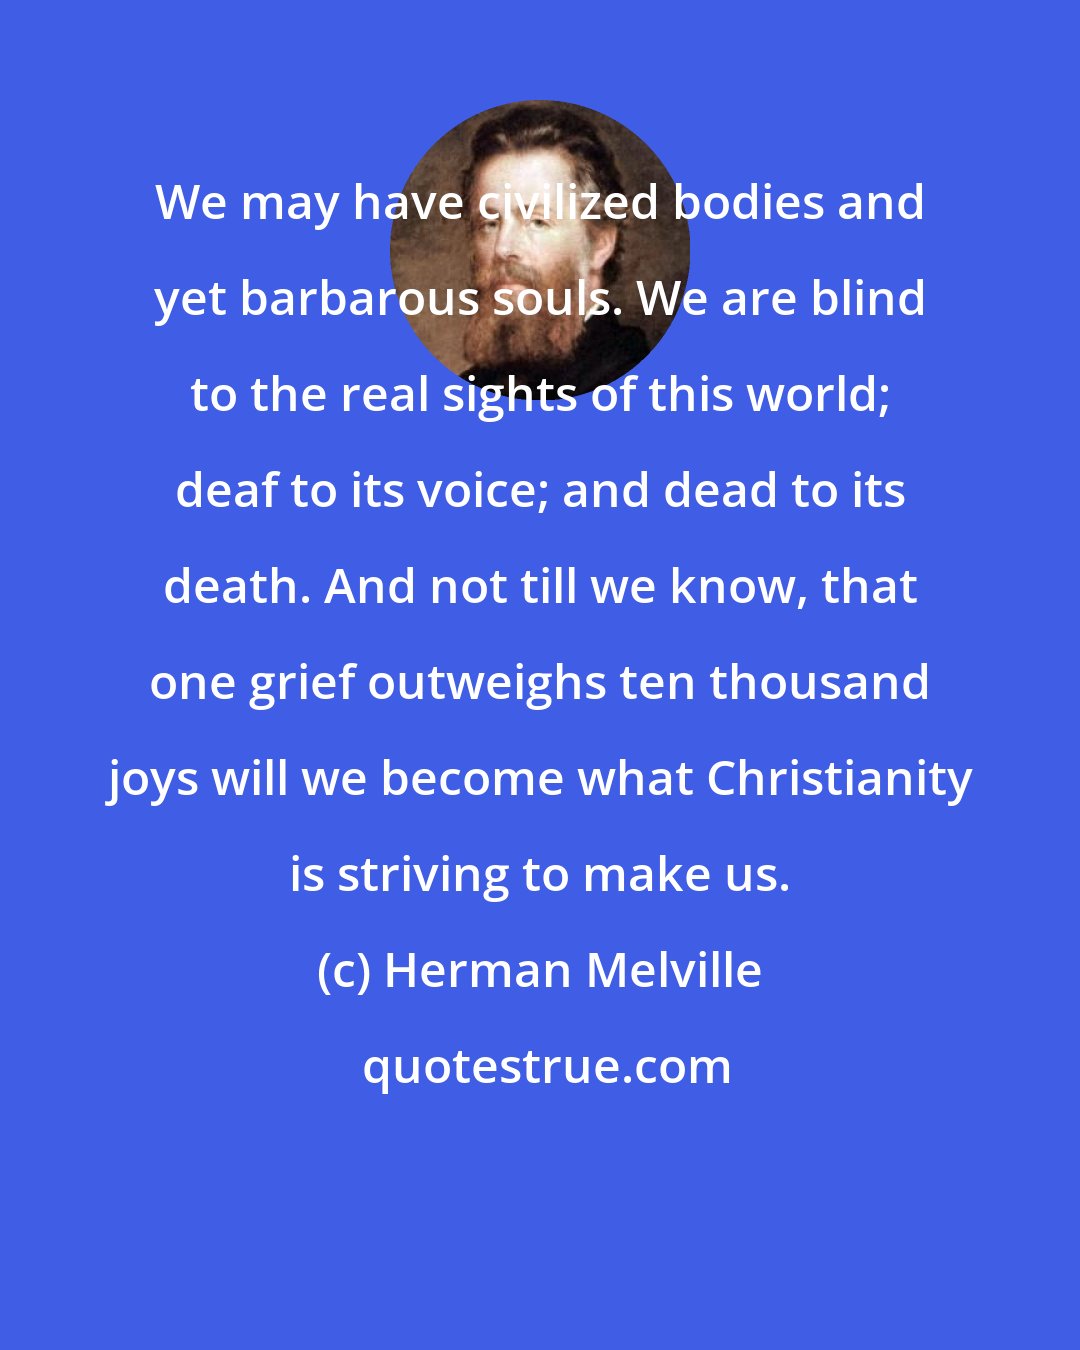 Herman Melville: We may have civilized bodies and yet barbarous souls. We are blind to the real sights of this world; deaf to its voice; and dead to its death. And not till we know, that one grief outweighs ten thousand joys will we become what Christianity is striving to make us.